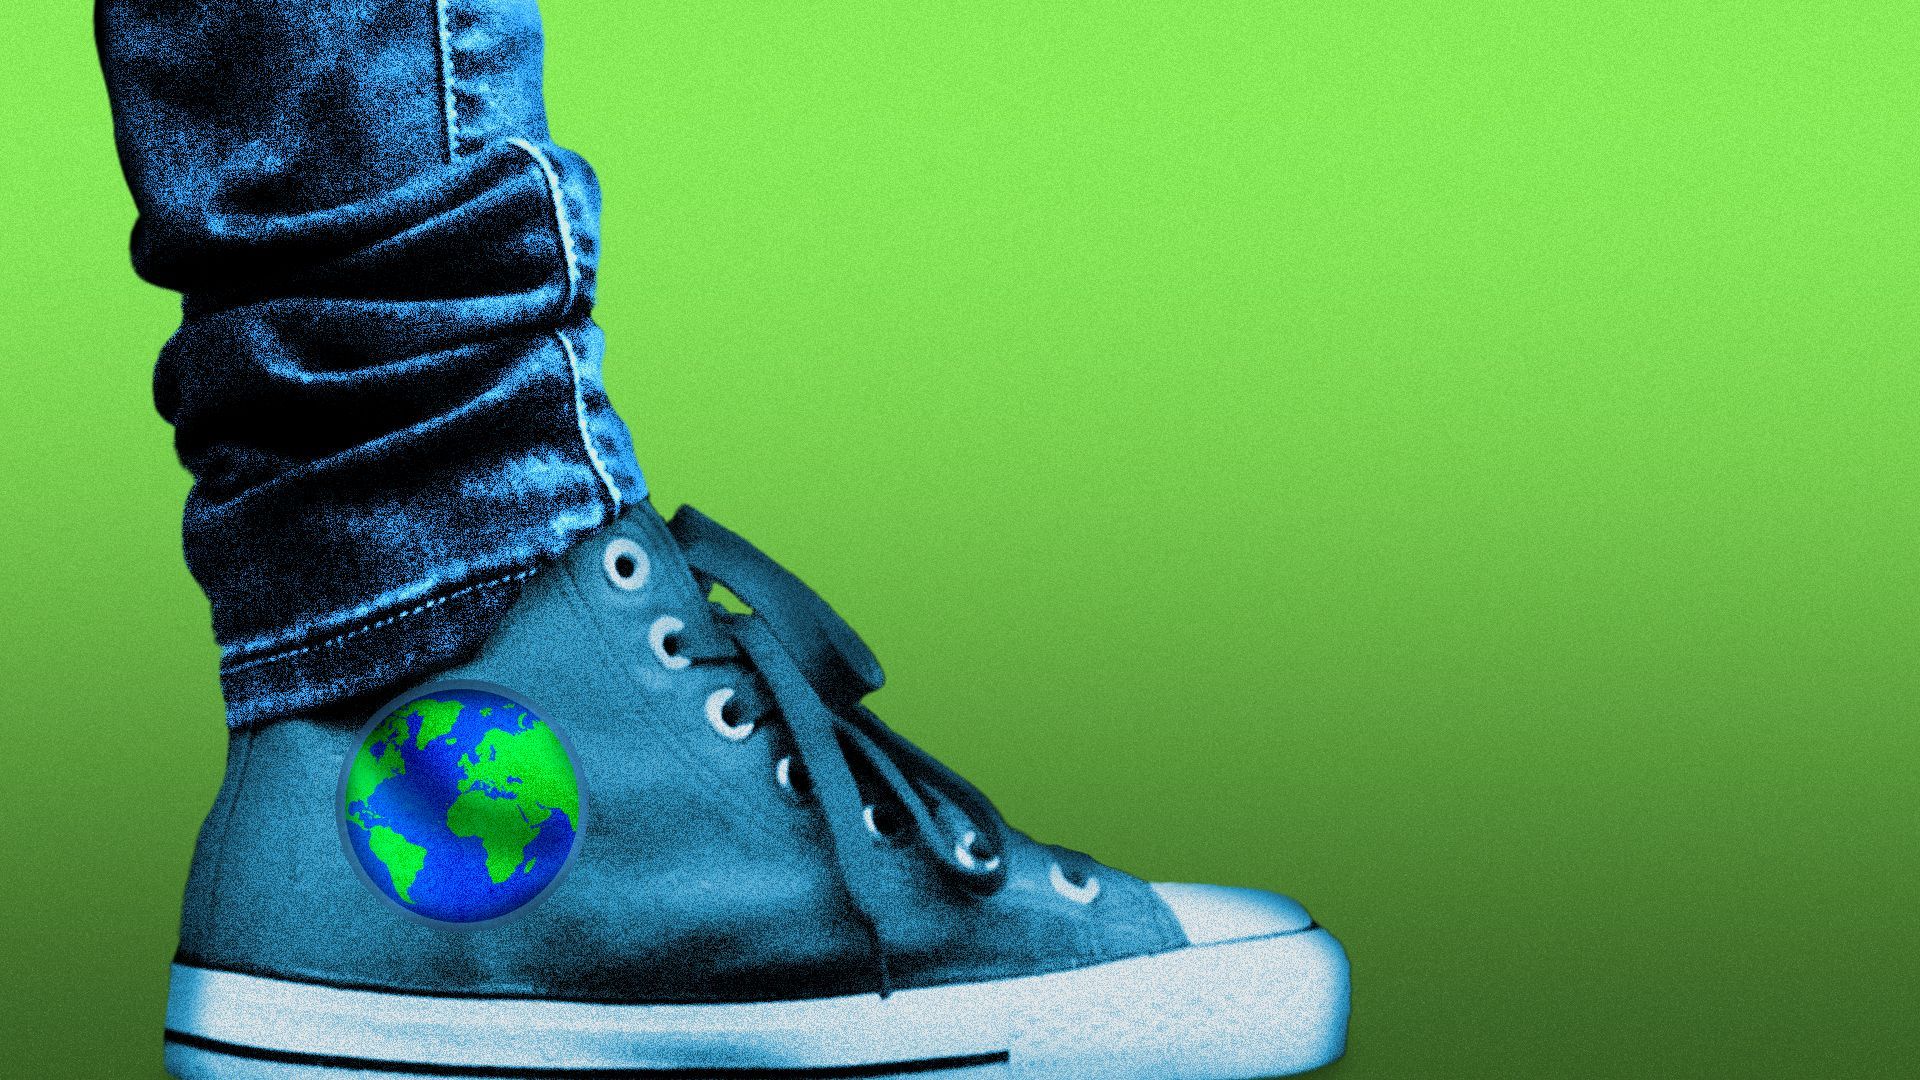 Illustration of a high-top sneaker with the Earth as the logo.